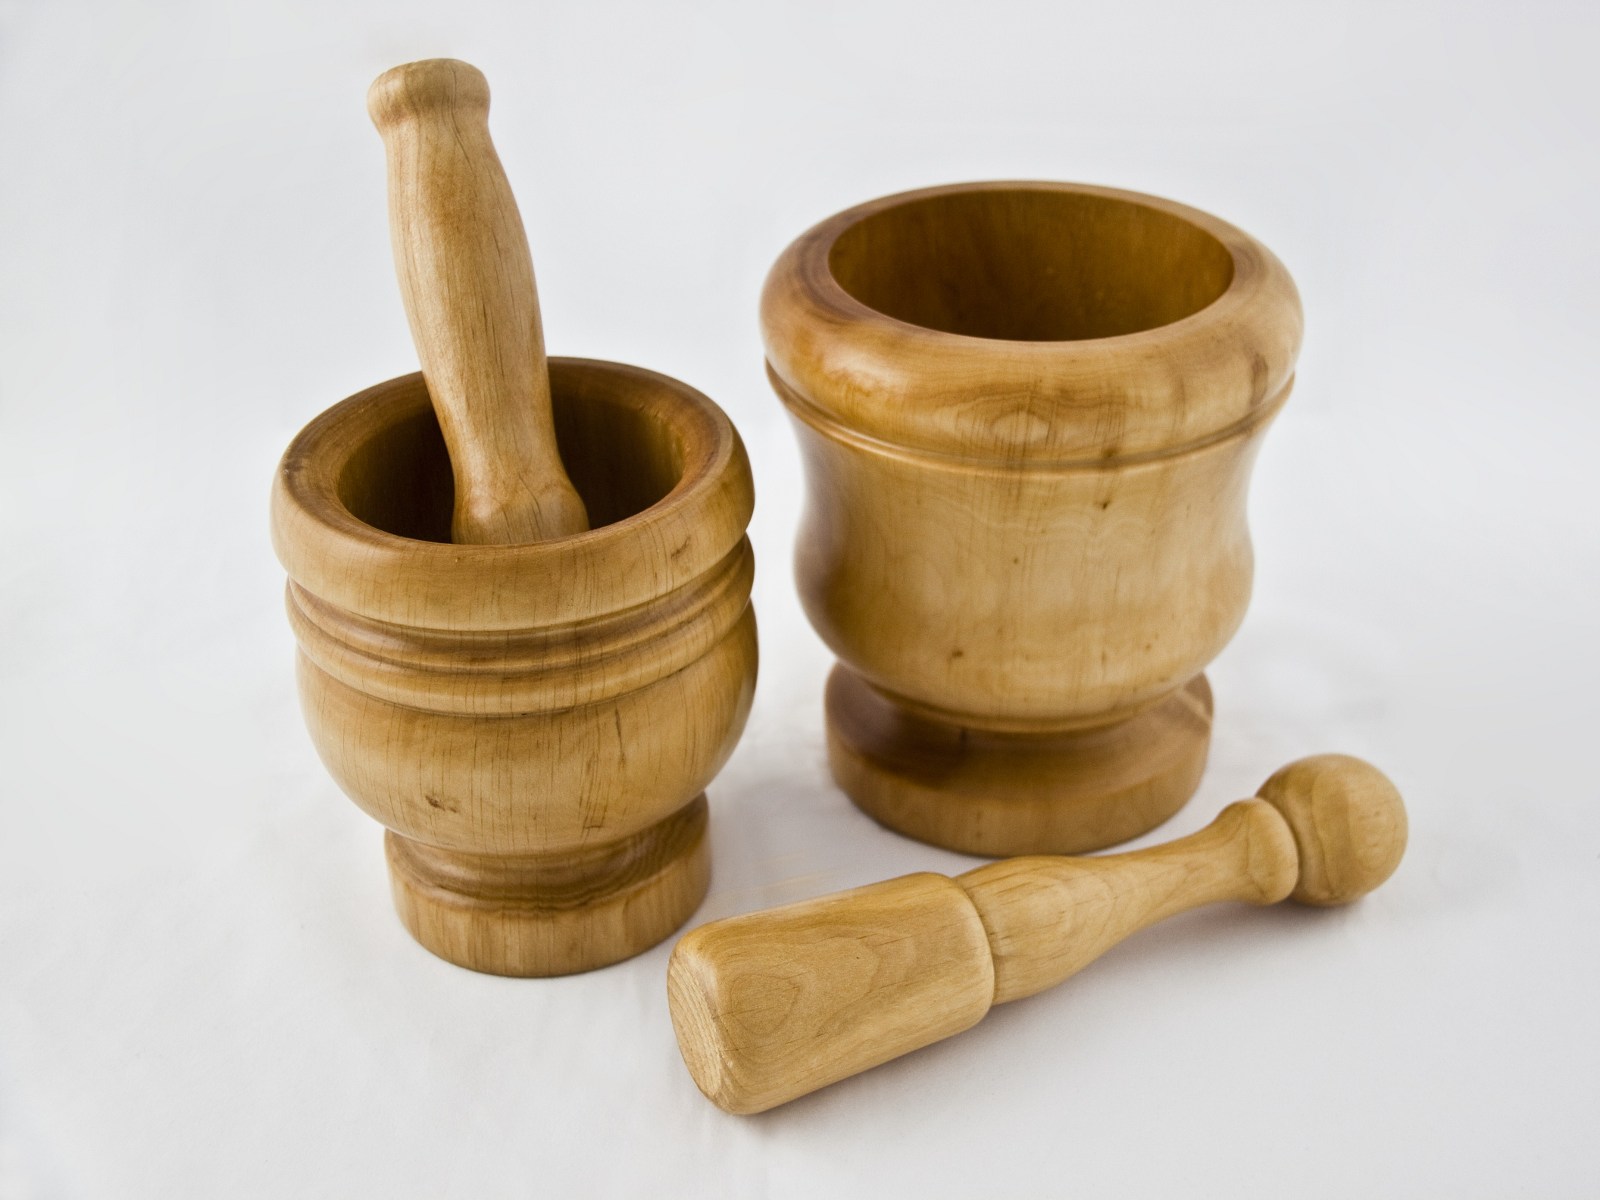 Household and Kitchenware Gianit | Catalog | Wood objects | Mortar ...